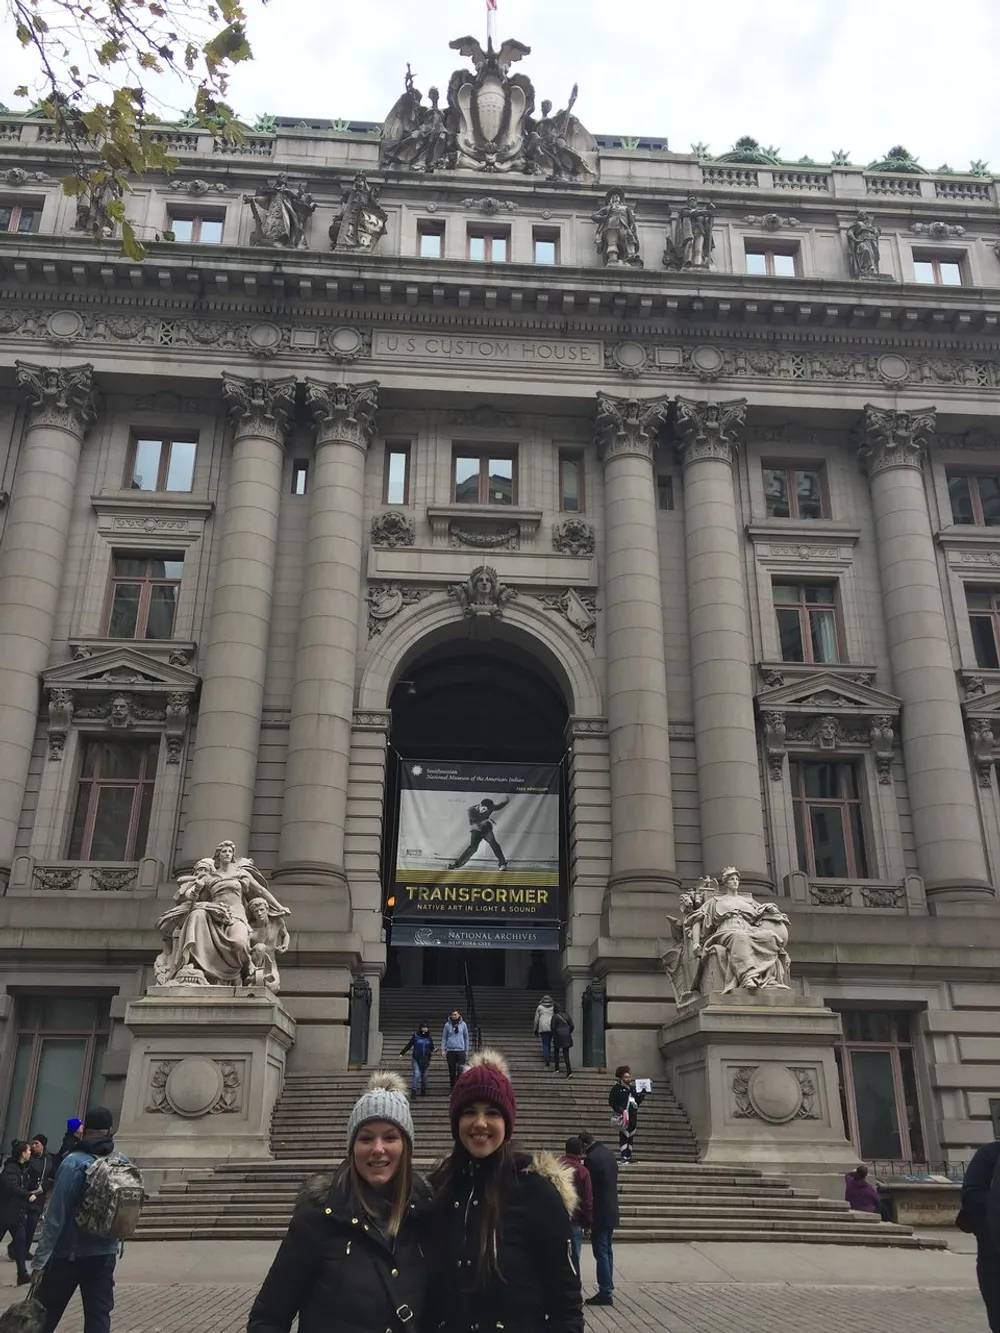 Two people are smiling in front of a grand historical building marked as the US Custom House with a banner promoting a Transformer exhibition at the National Archives